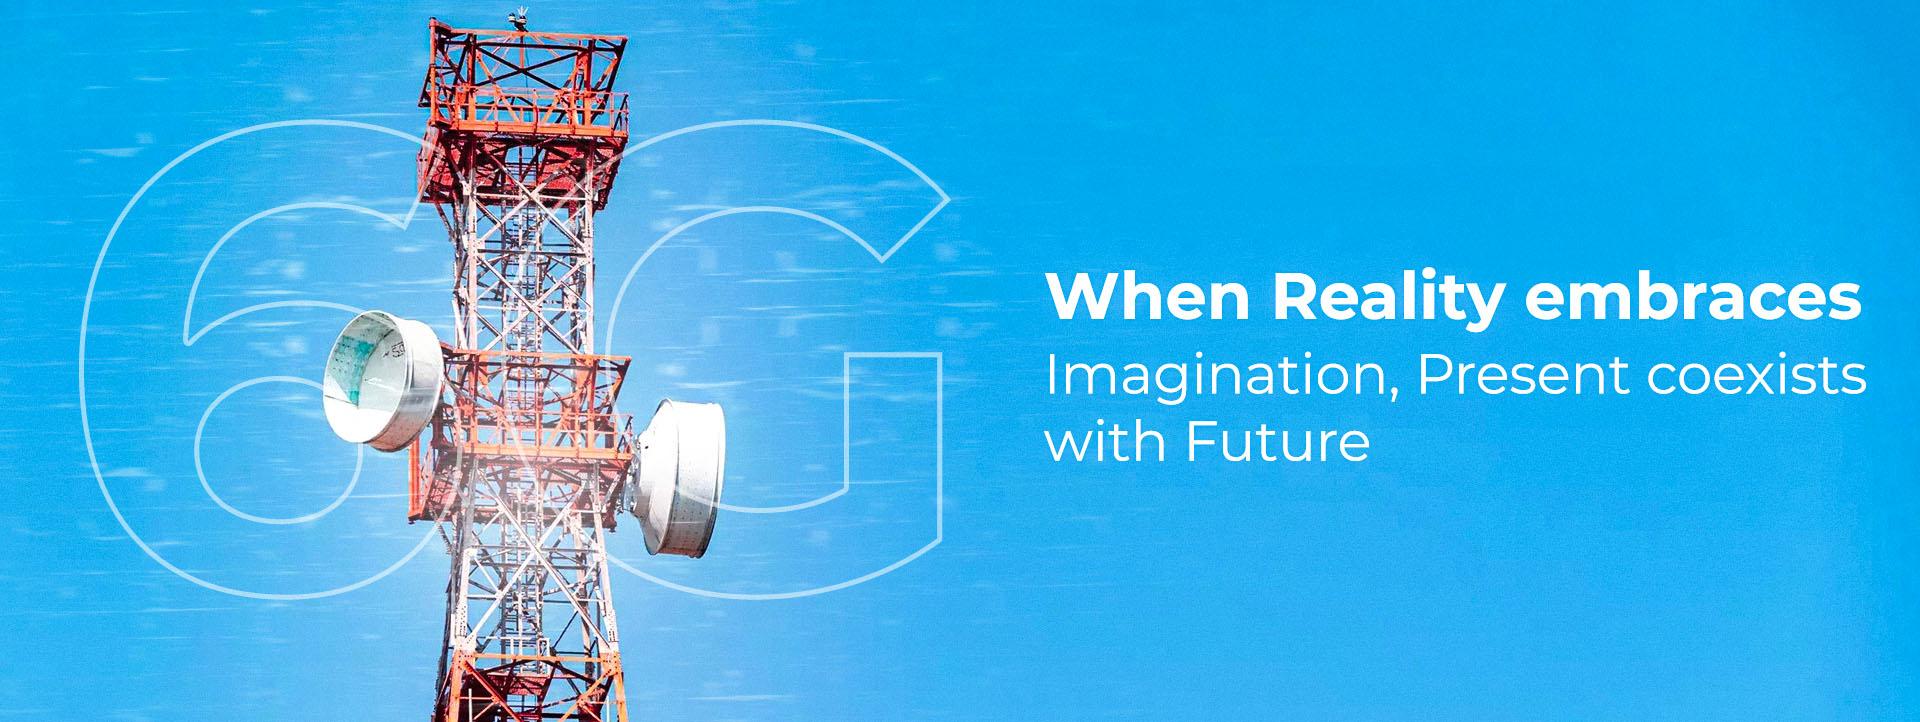 6G: When Reality embraces Imagination, Present coexists with Future